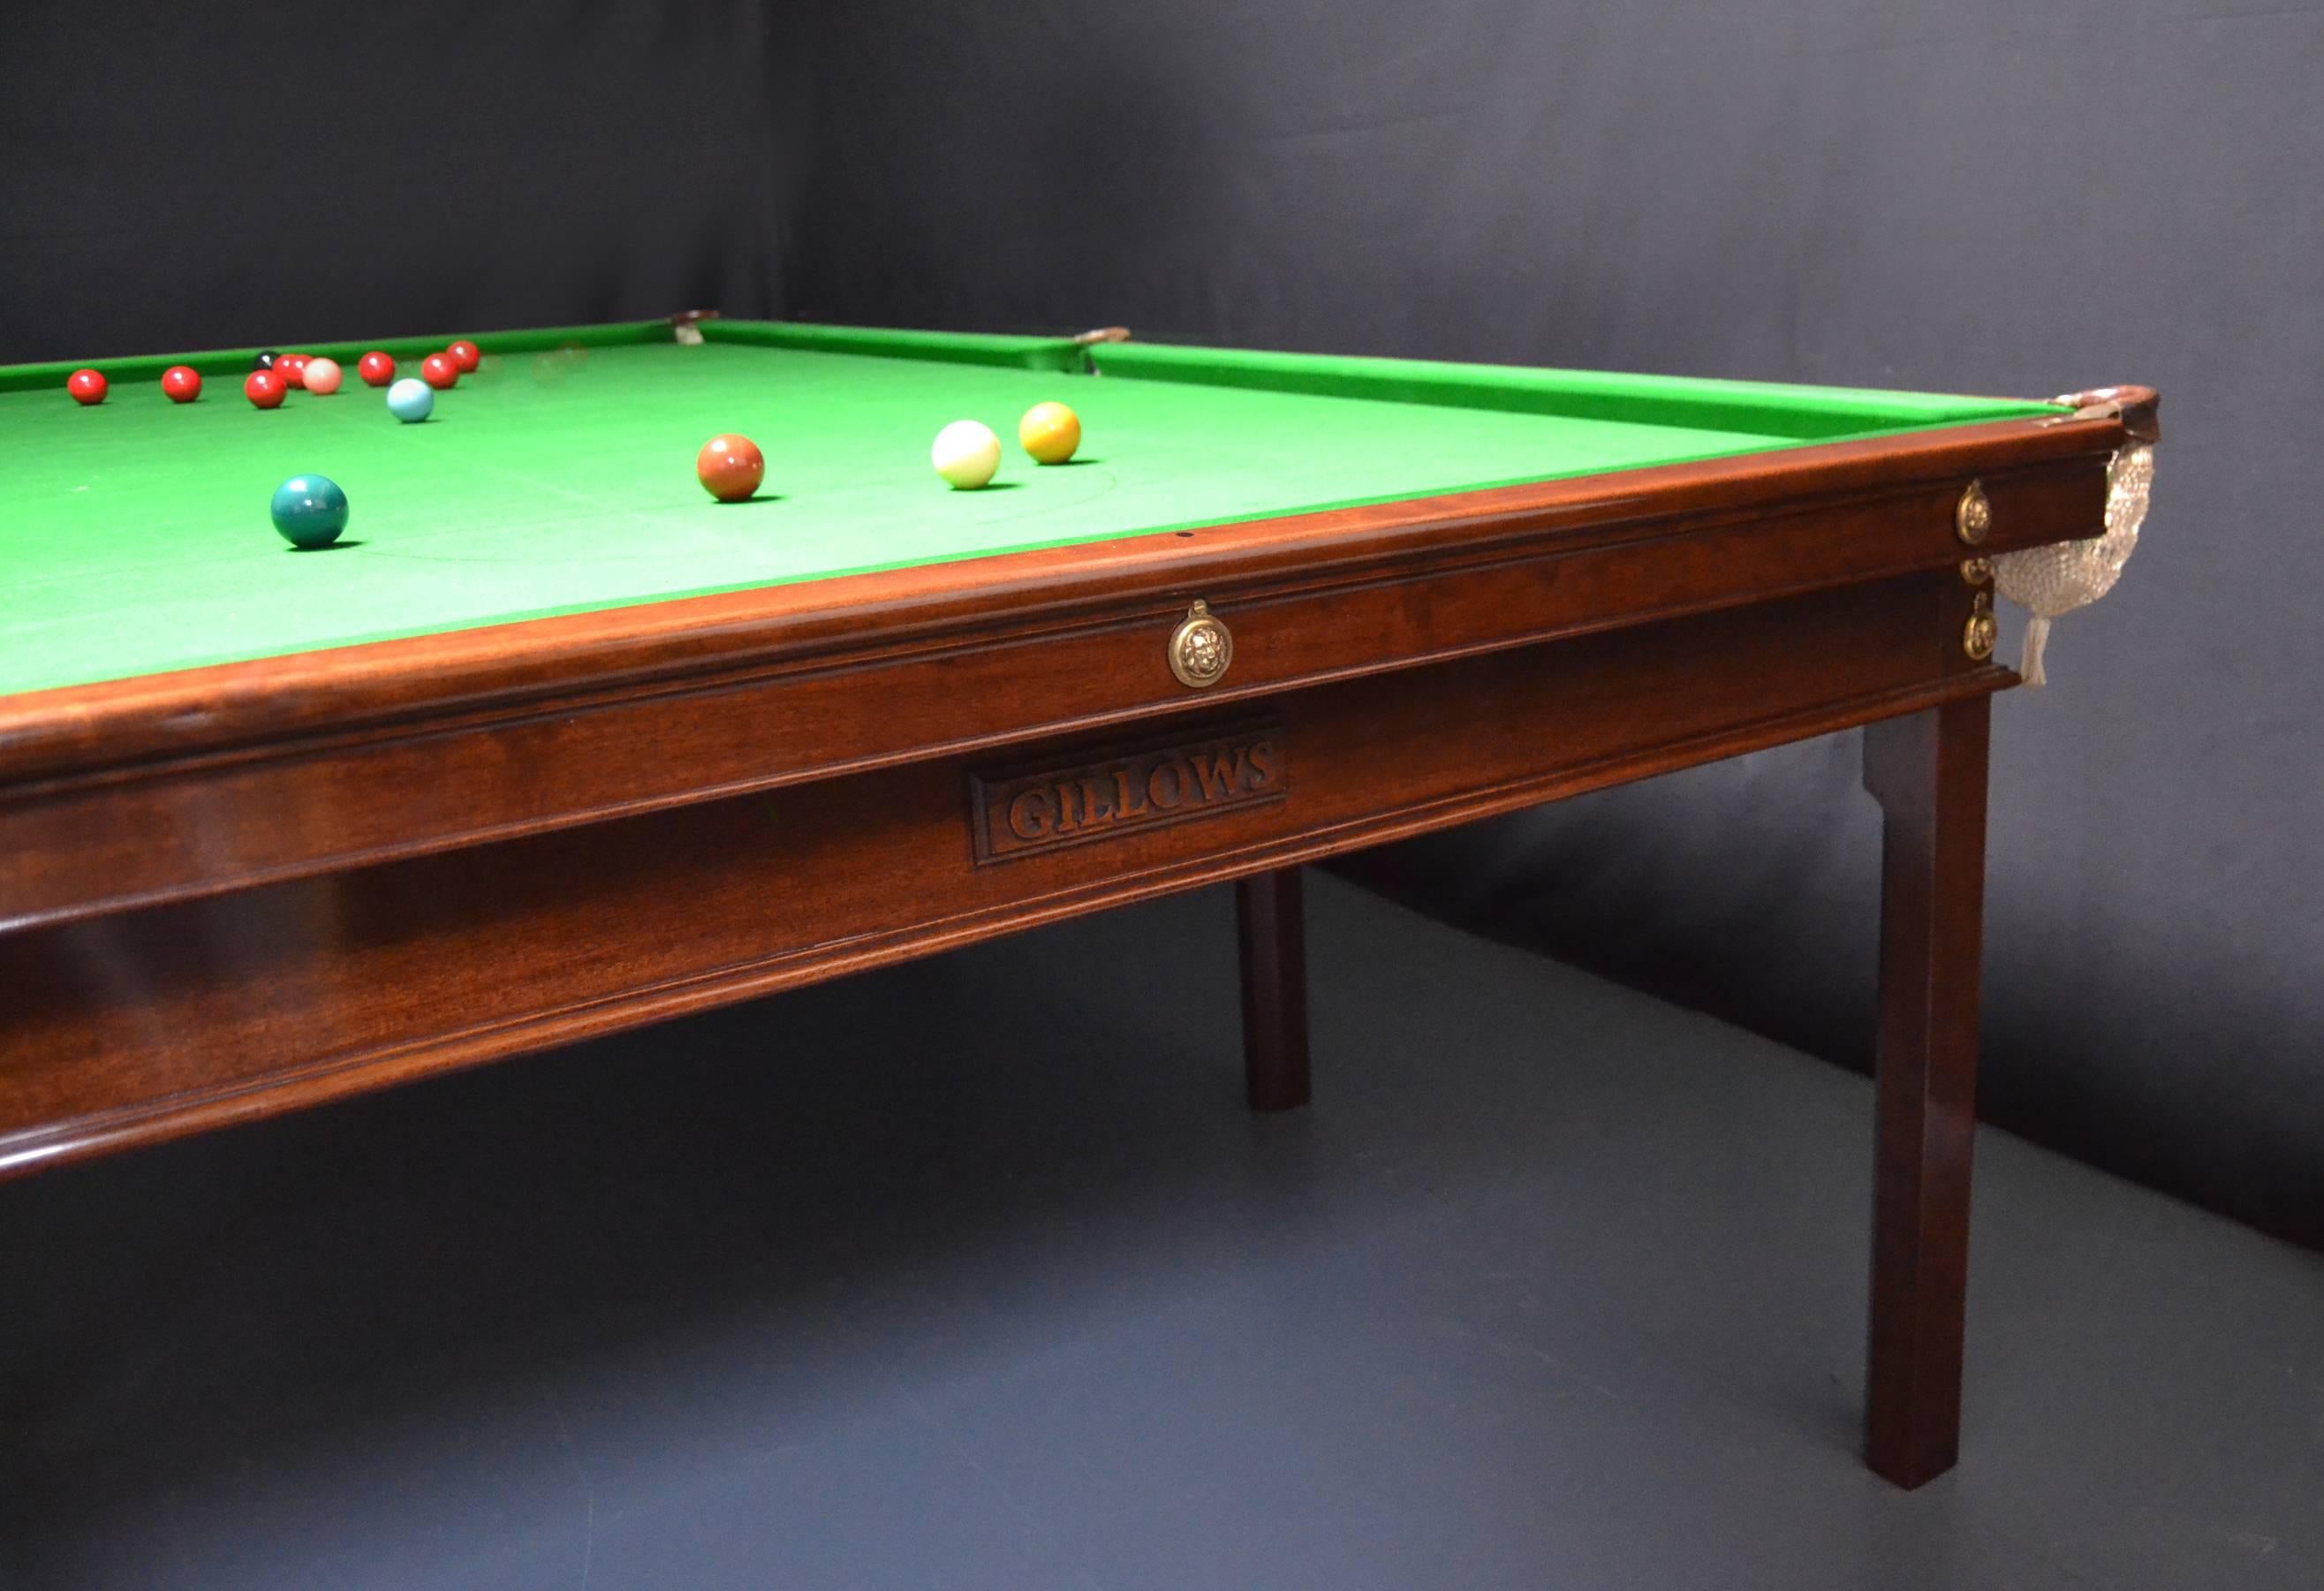 A rare 10ft x 5ft Billiard or Snooker table in the Gainsborough manner by Gillow's of Lancaster circa 1800, standing on eight elegant chamfered and shaped legs, with brass mounts fitted to the frame, legs and cushion friezes.
The simple but